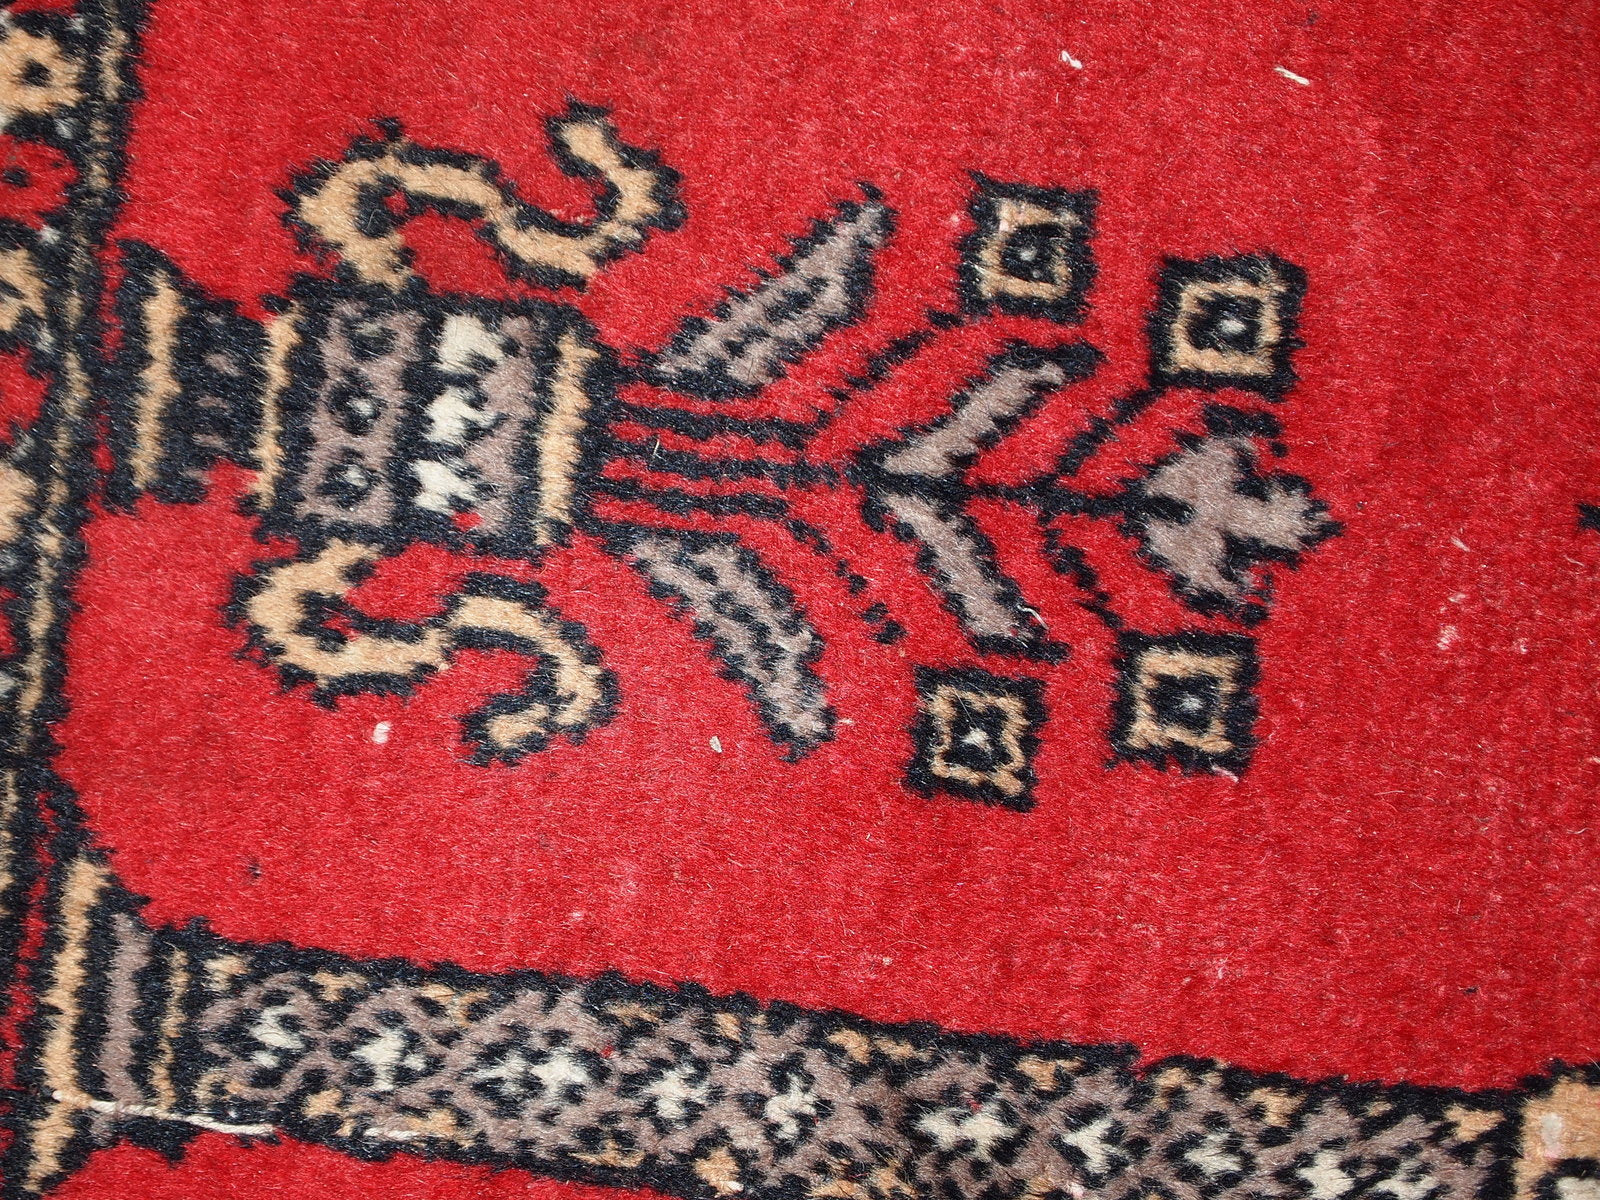 Vintage handmade Pakistani Lahore praying rug in original condition, it has some low pile. The rug is from the middle of 20th century.